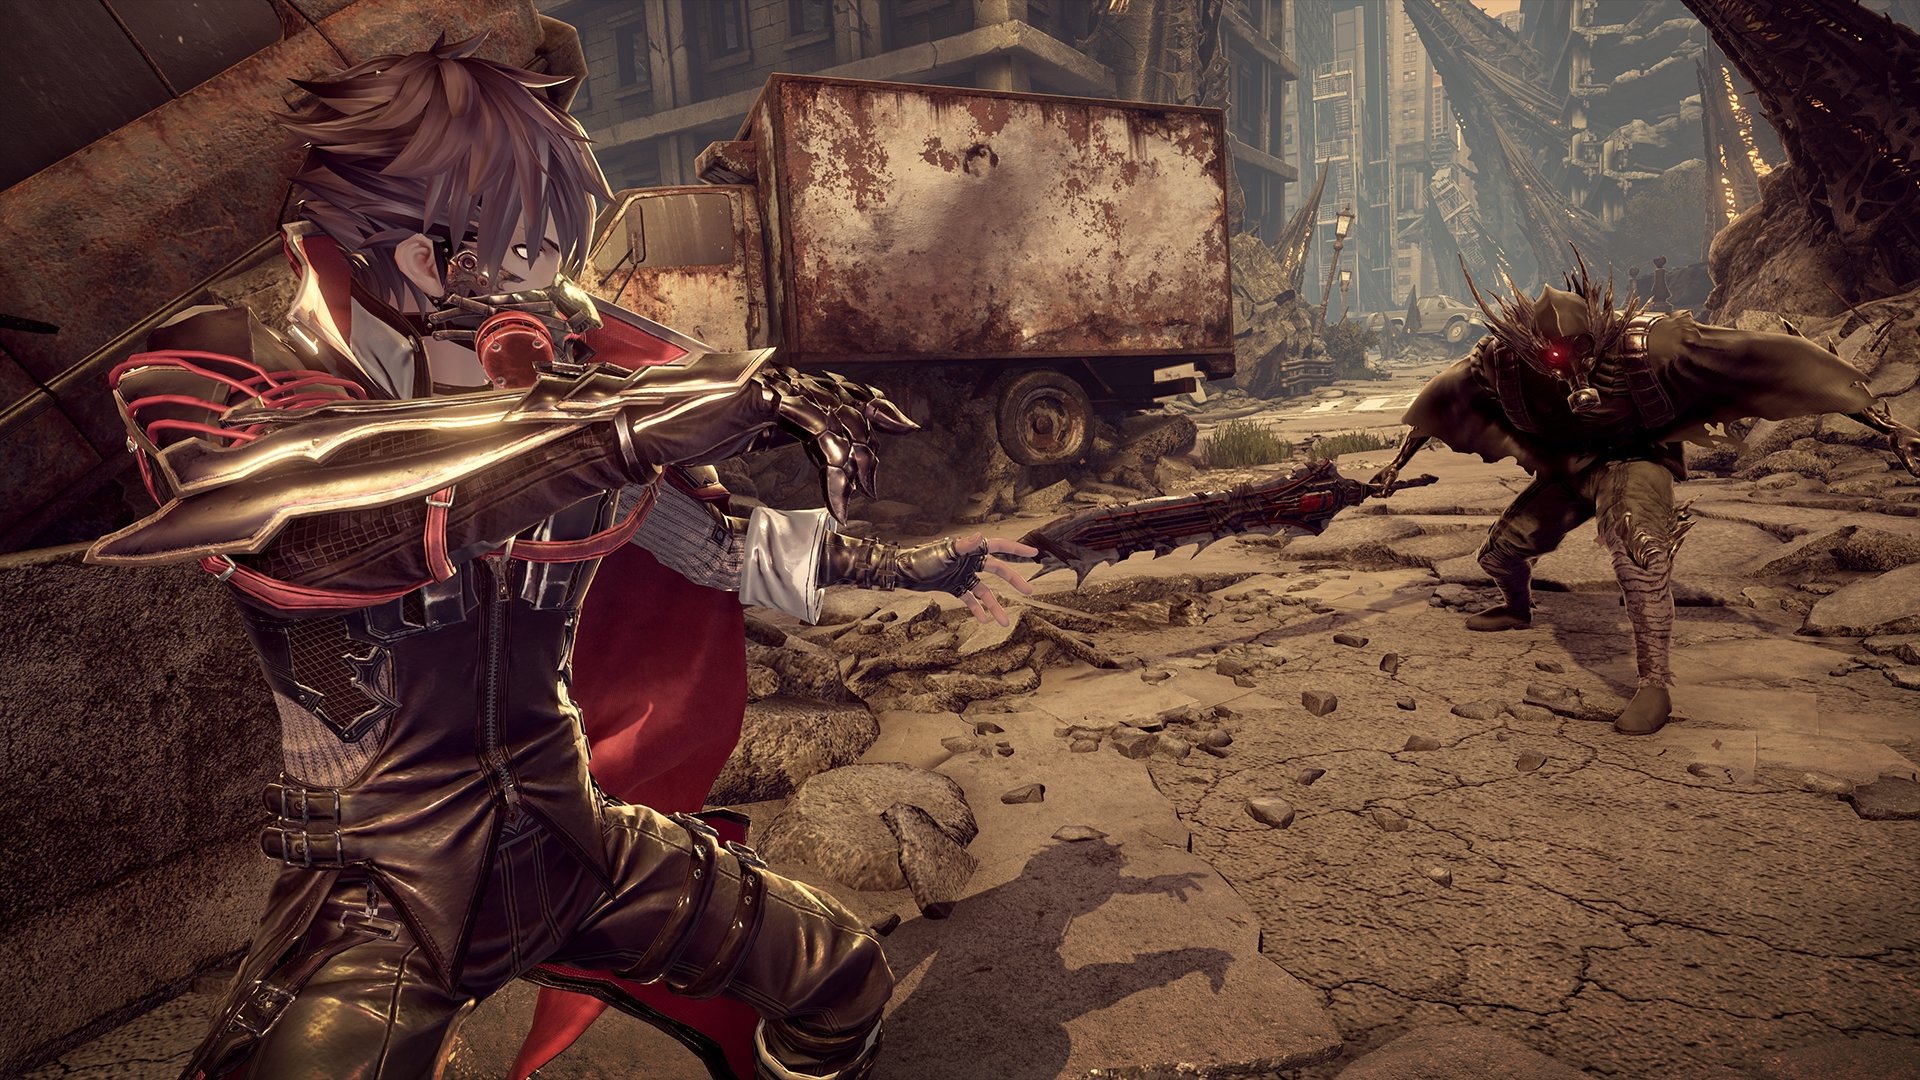 Anime Souls Code Vein Release Date Revealed - Both Japanese And